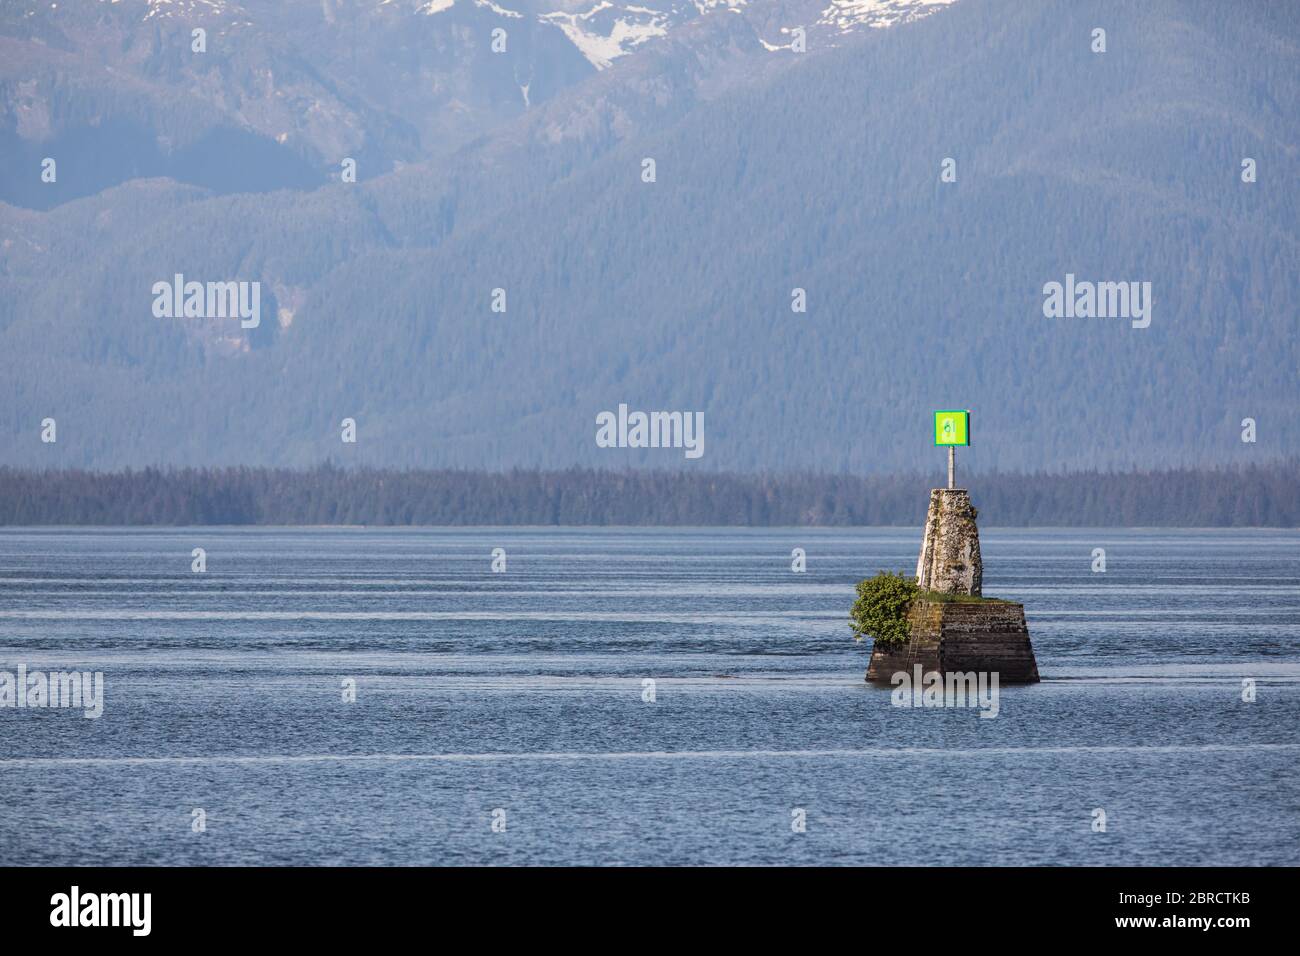 The Wrangell Narrows comprise scenic views and and marker buoys outside Petersburg, Southeast Alaska, USA. Stock Photo